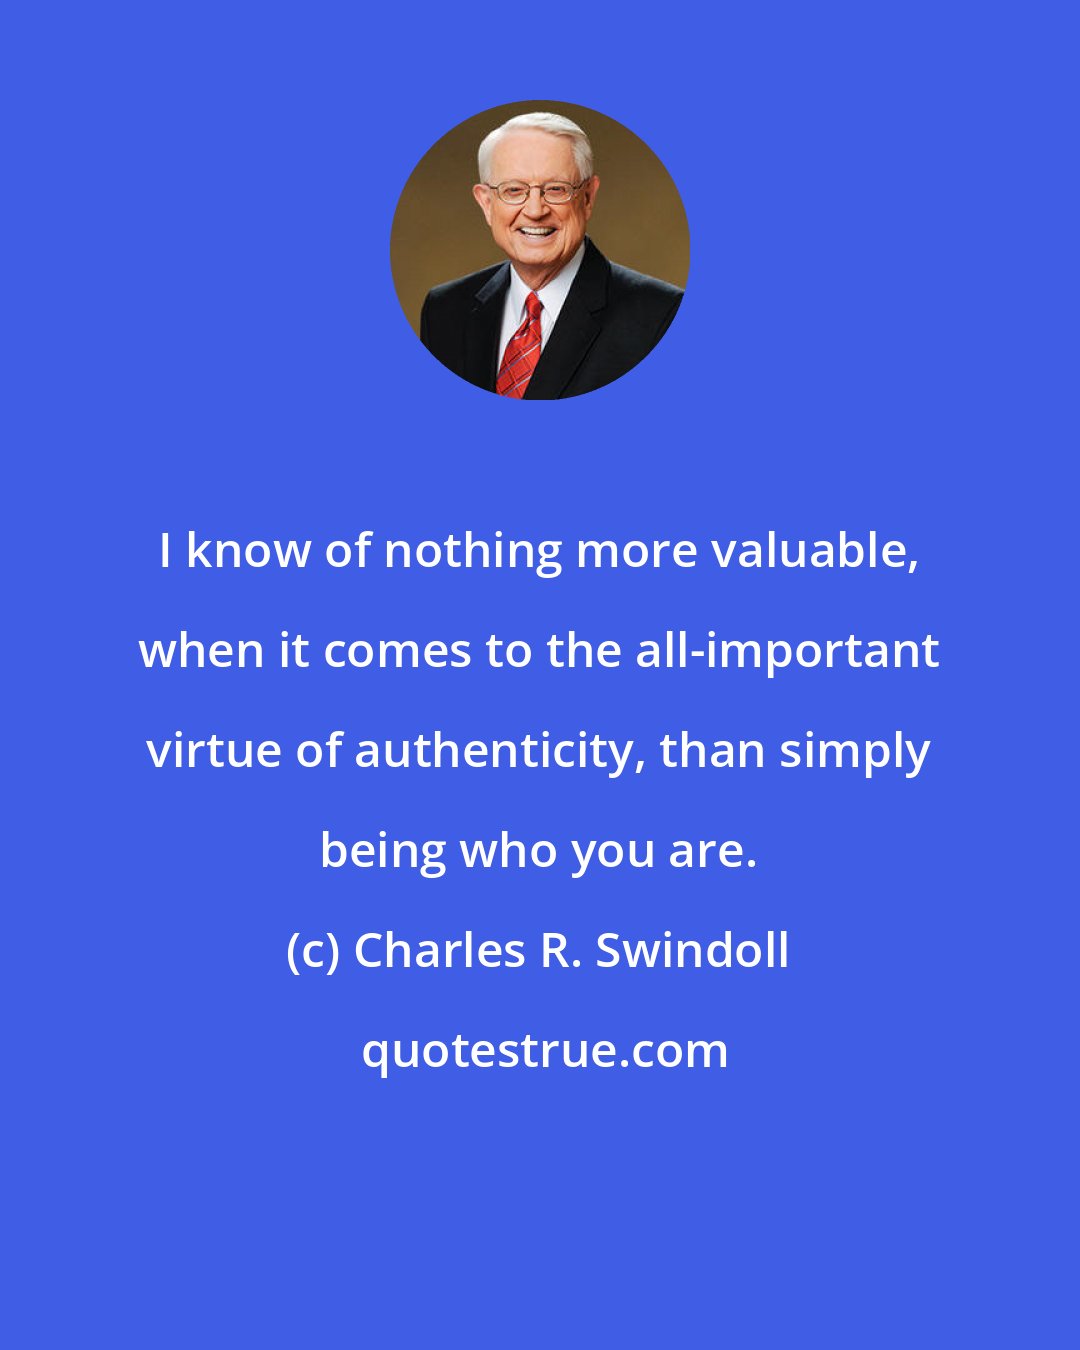 Charles R. Swindoll: I know of nothing more valuable, when it comes to the all-important virtue of authenticity, than simply being who you are.